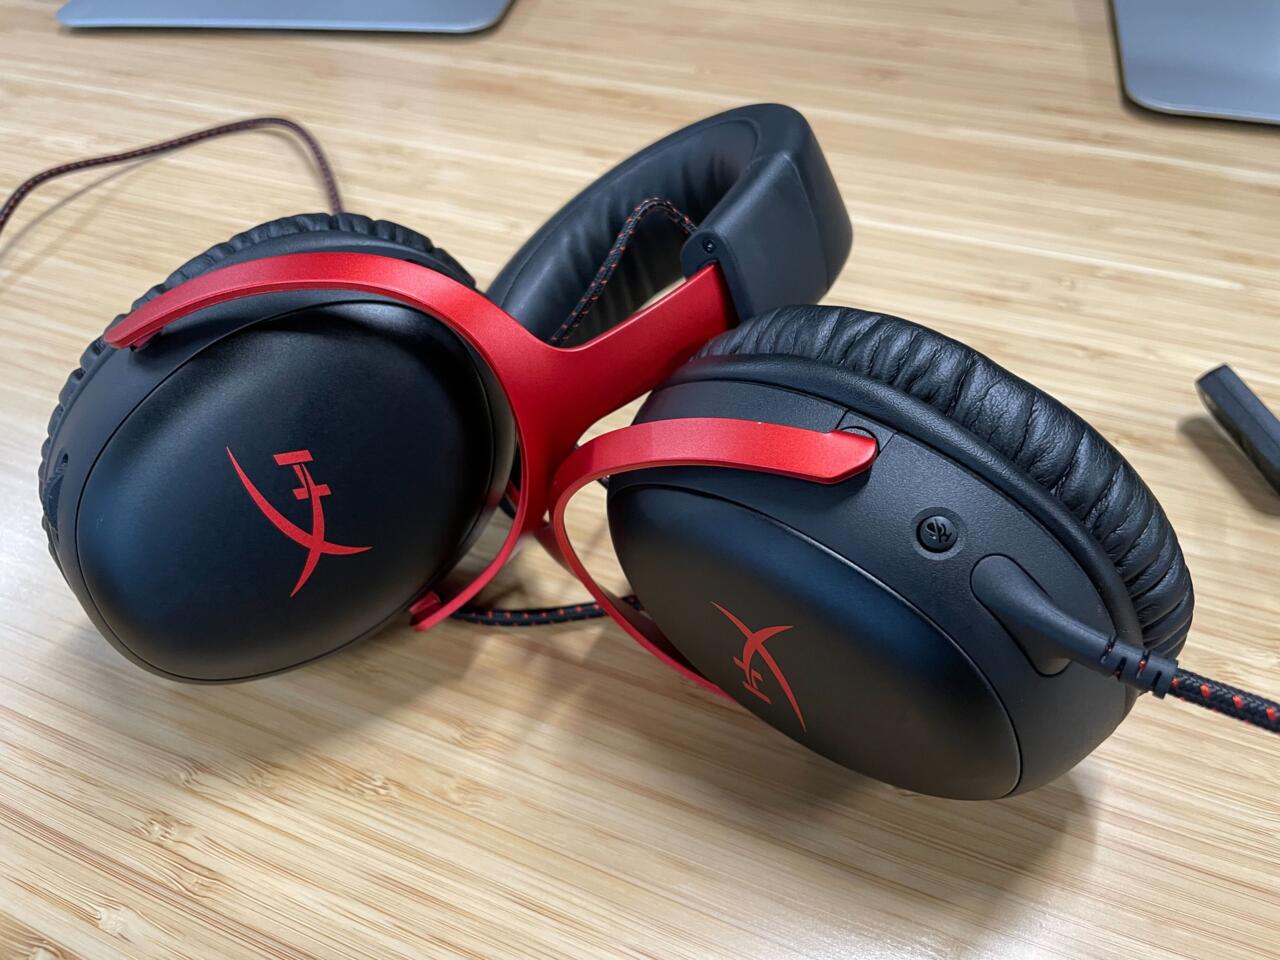 You can twist the HyperX Cloud III into a pretzel and it'll be fine, but you probably don't want to do this.